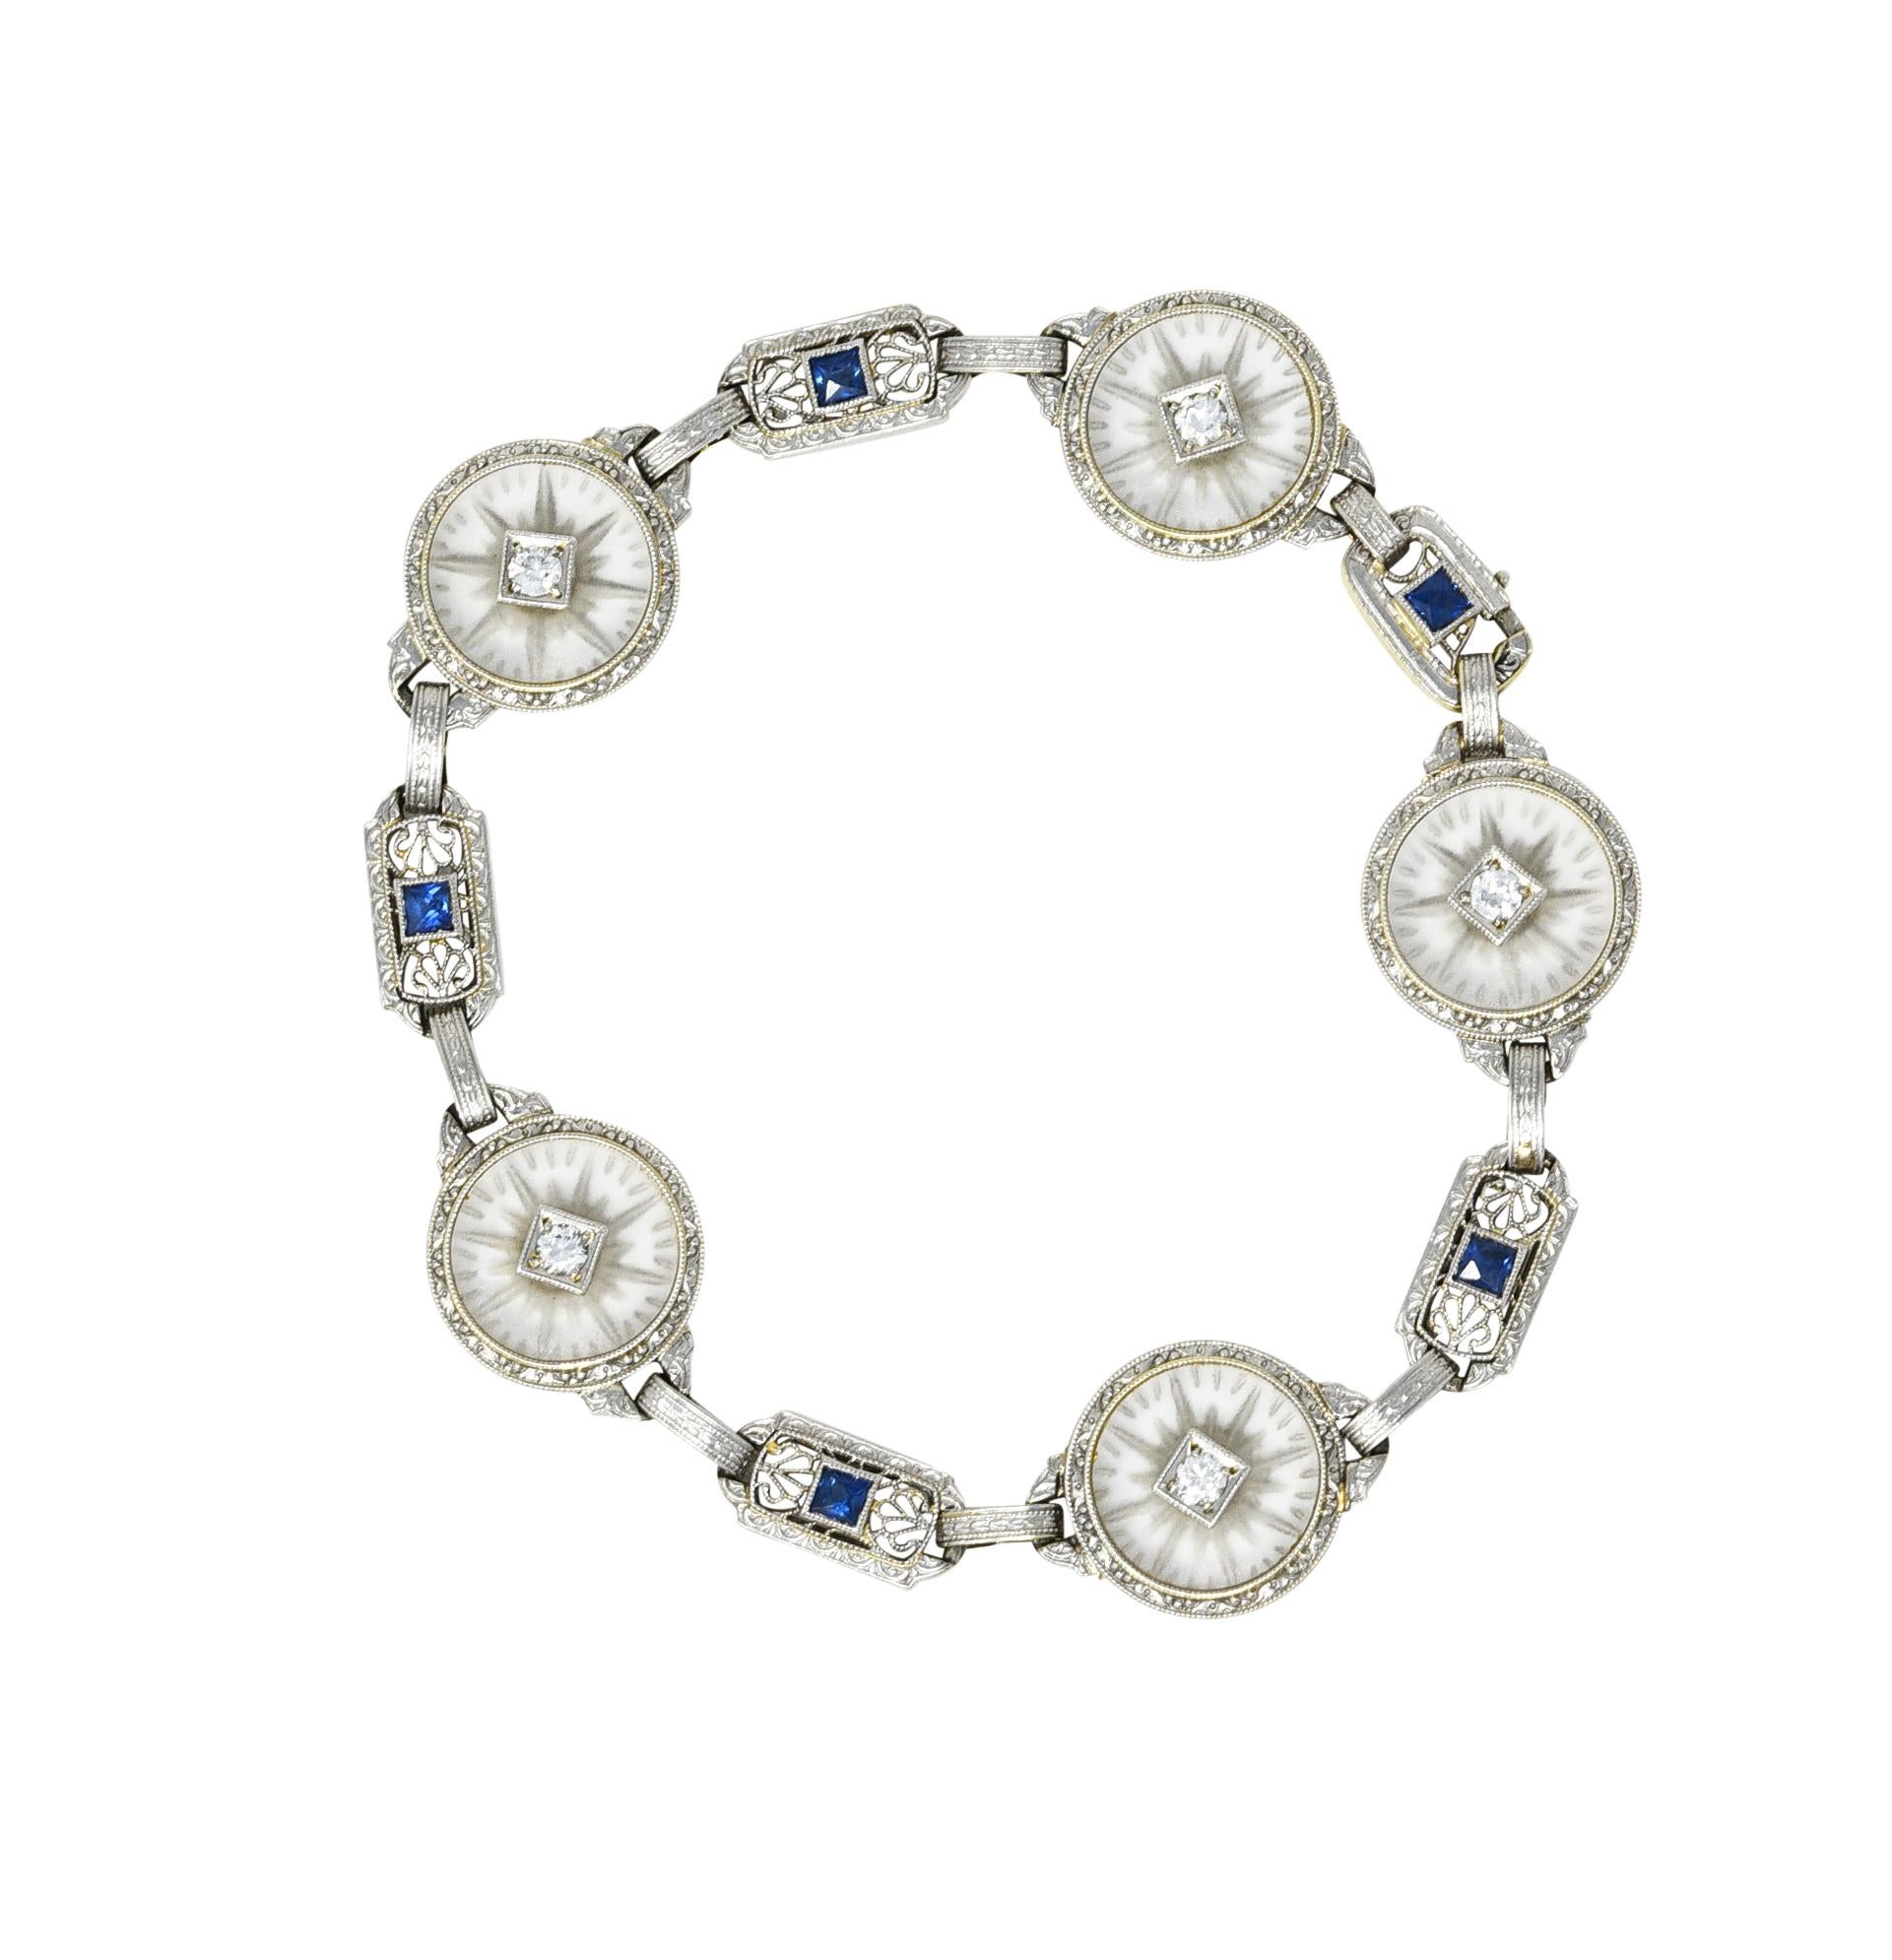 Bracelet designed as detailed alternating links of filigree and 15.0 mm round camphor glass tablets

Camphor glass is frosted with radial pattern and bezel set with scrolling detailed surround 

Accented by transitional cut diamonds weighing